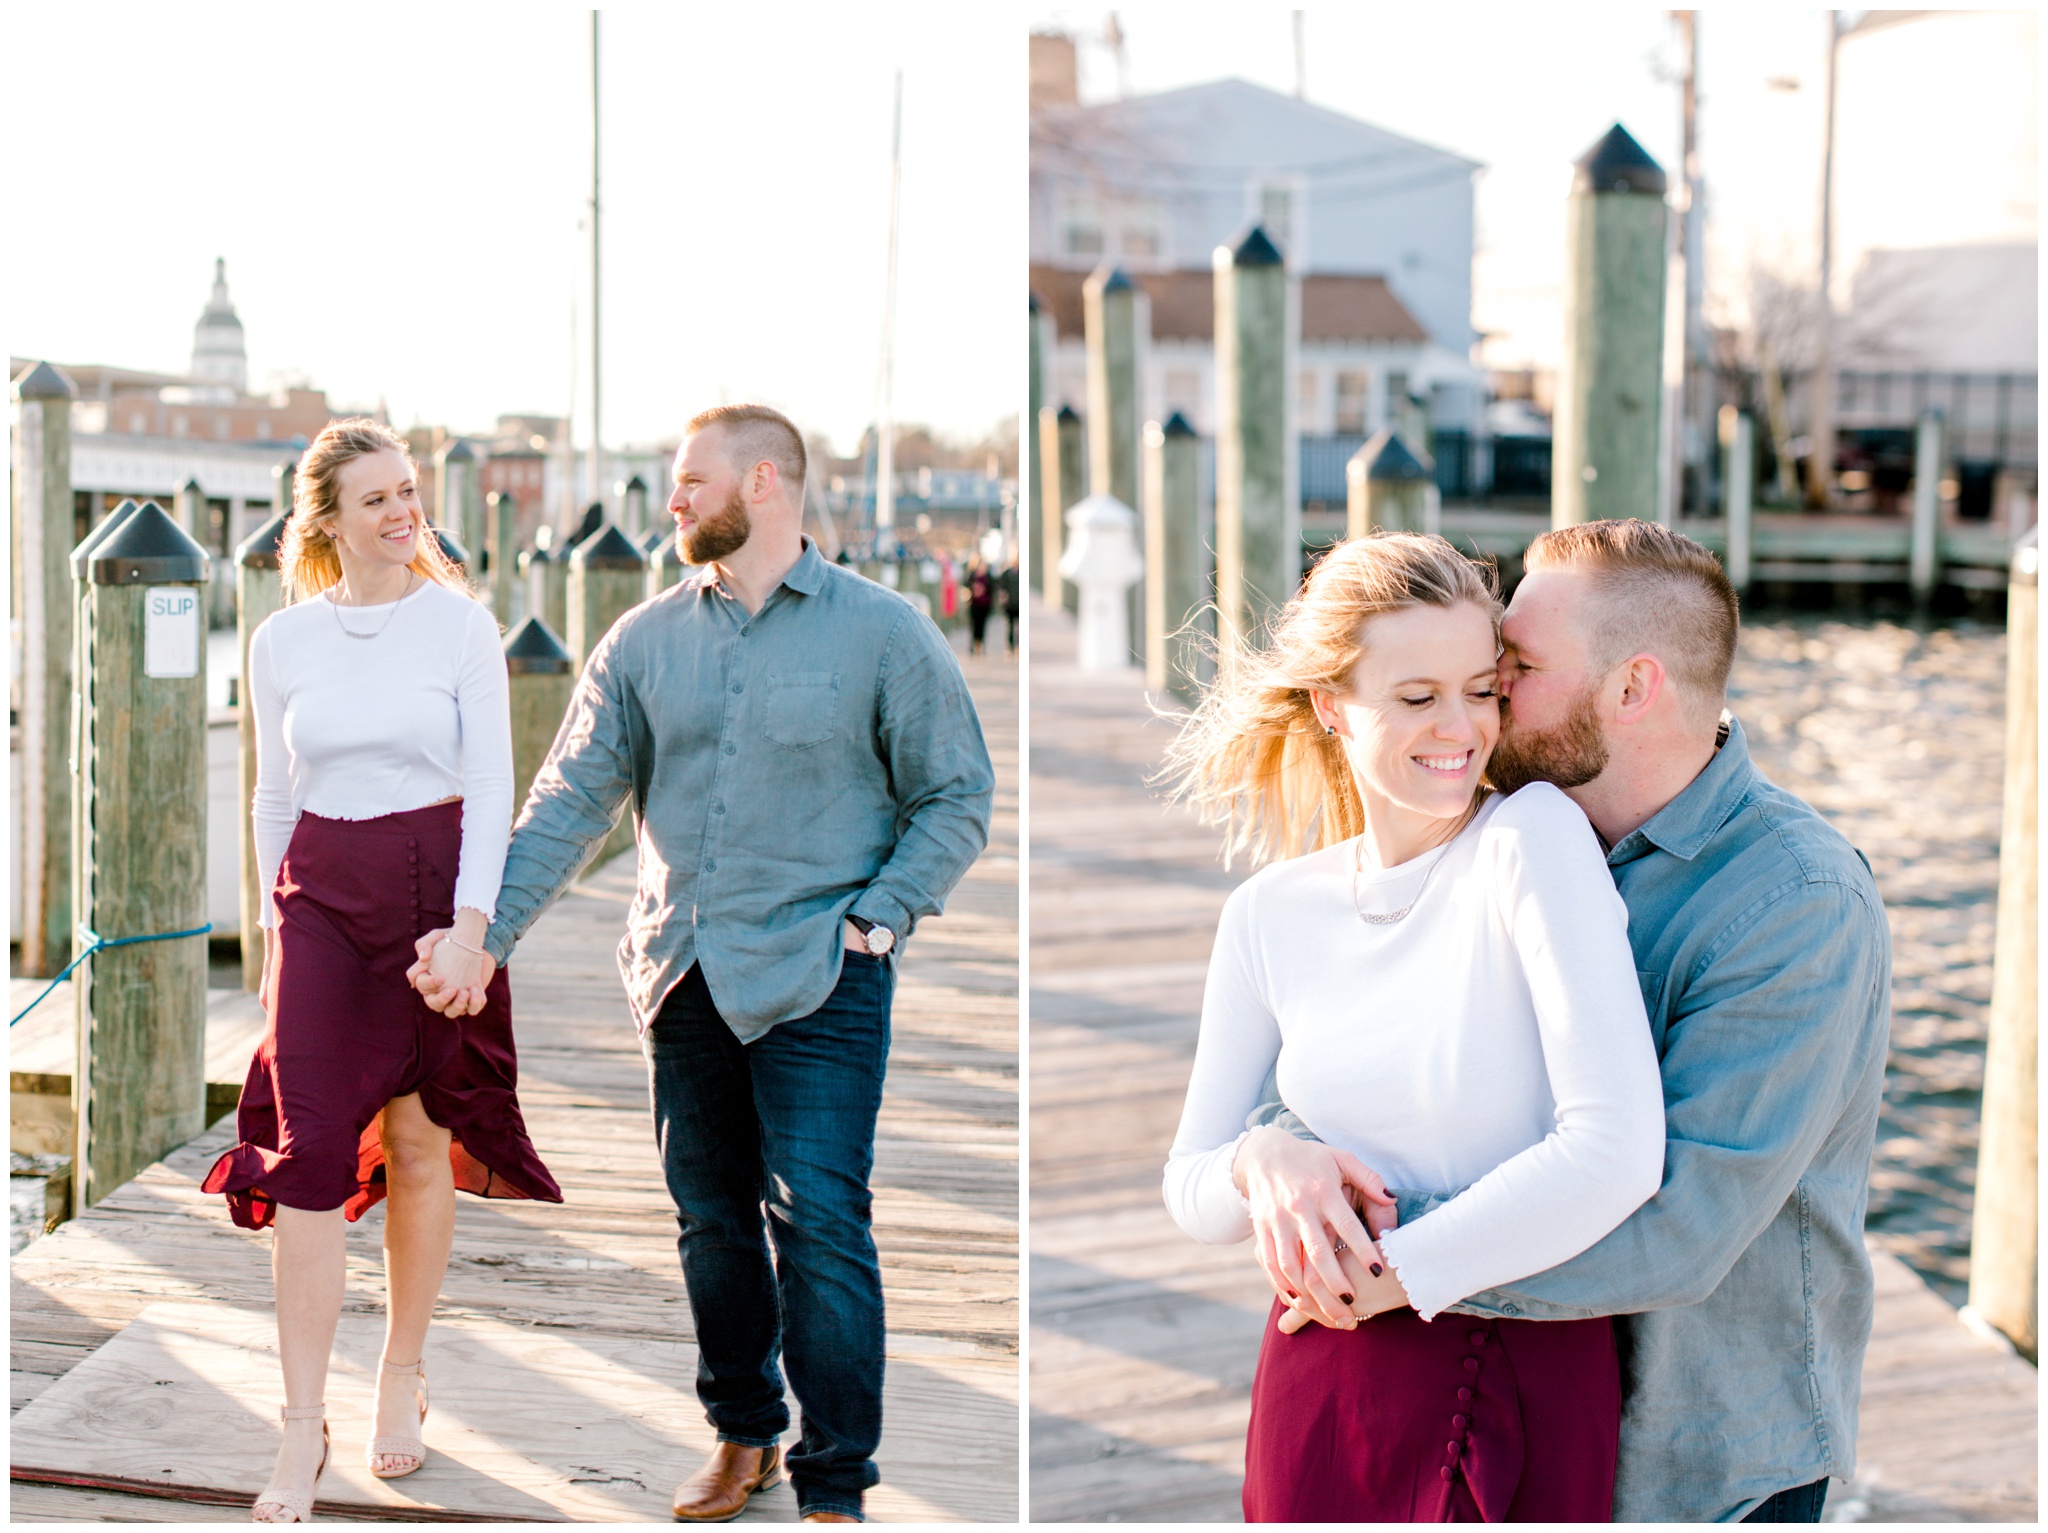 Downtown Annapolis Engagement Session - Check out this cute Annapolis Engagement Session. We took images on the docks, down the alleyways, near the statehouse, and more! 